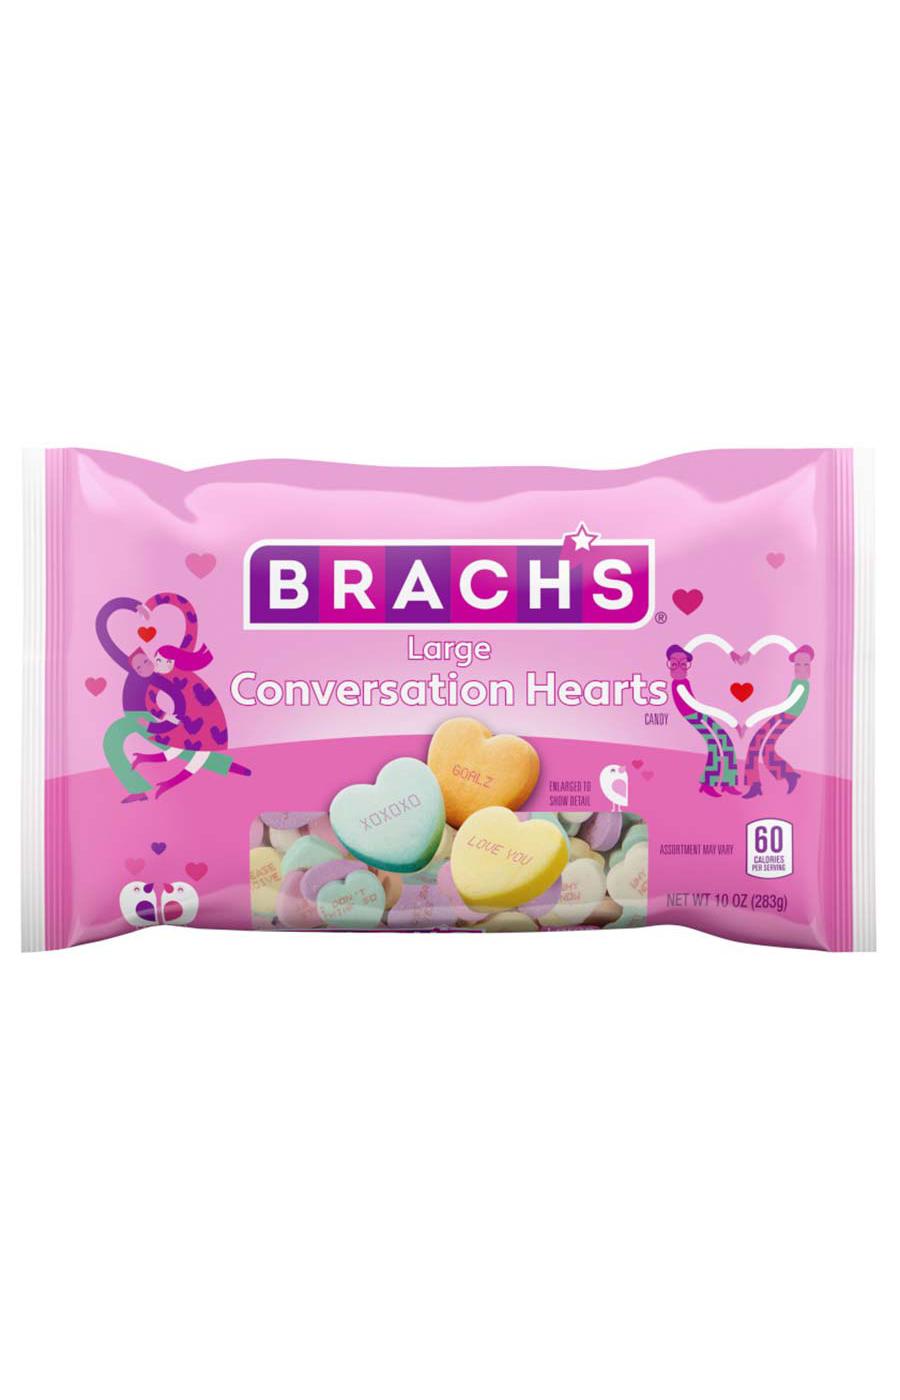 Brach's Large Conversation Hearts Valentine's Candy; image 1 of 2